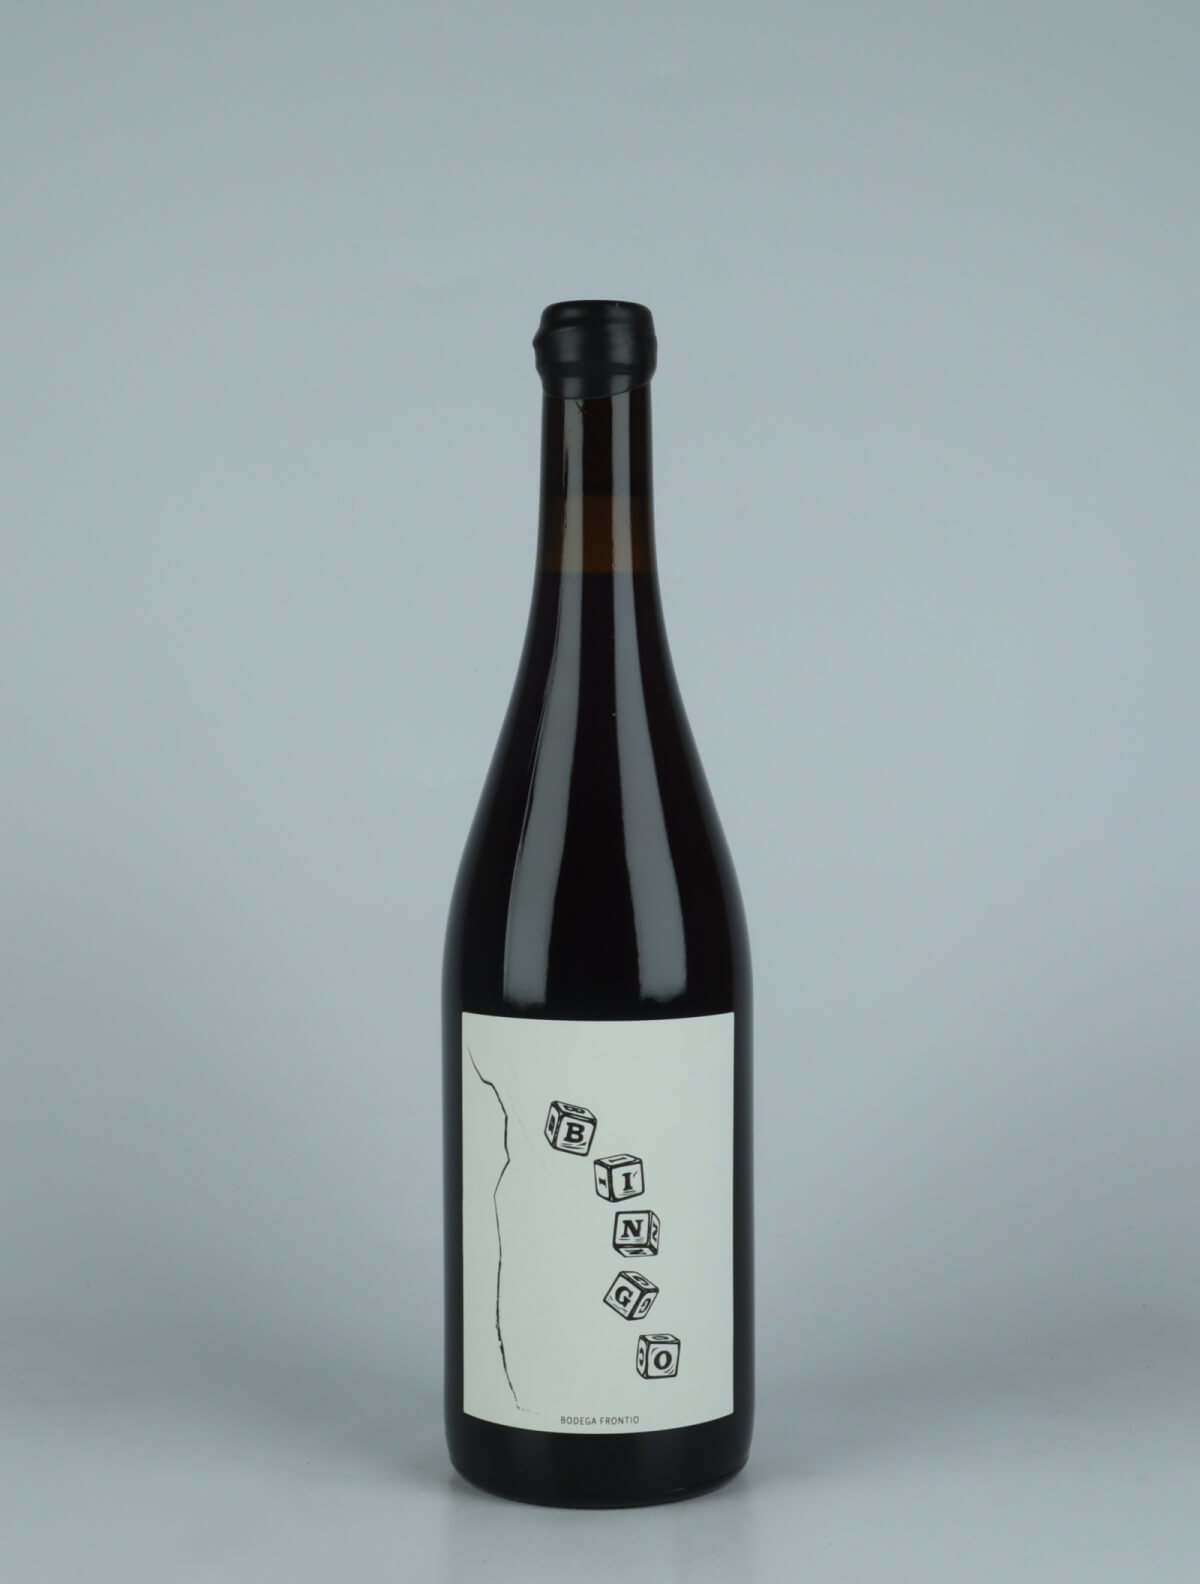 A bottle 2022 Bingo Red wine from Bodega Frontio, Arribes in Spain